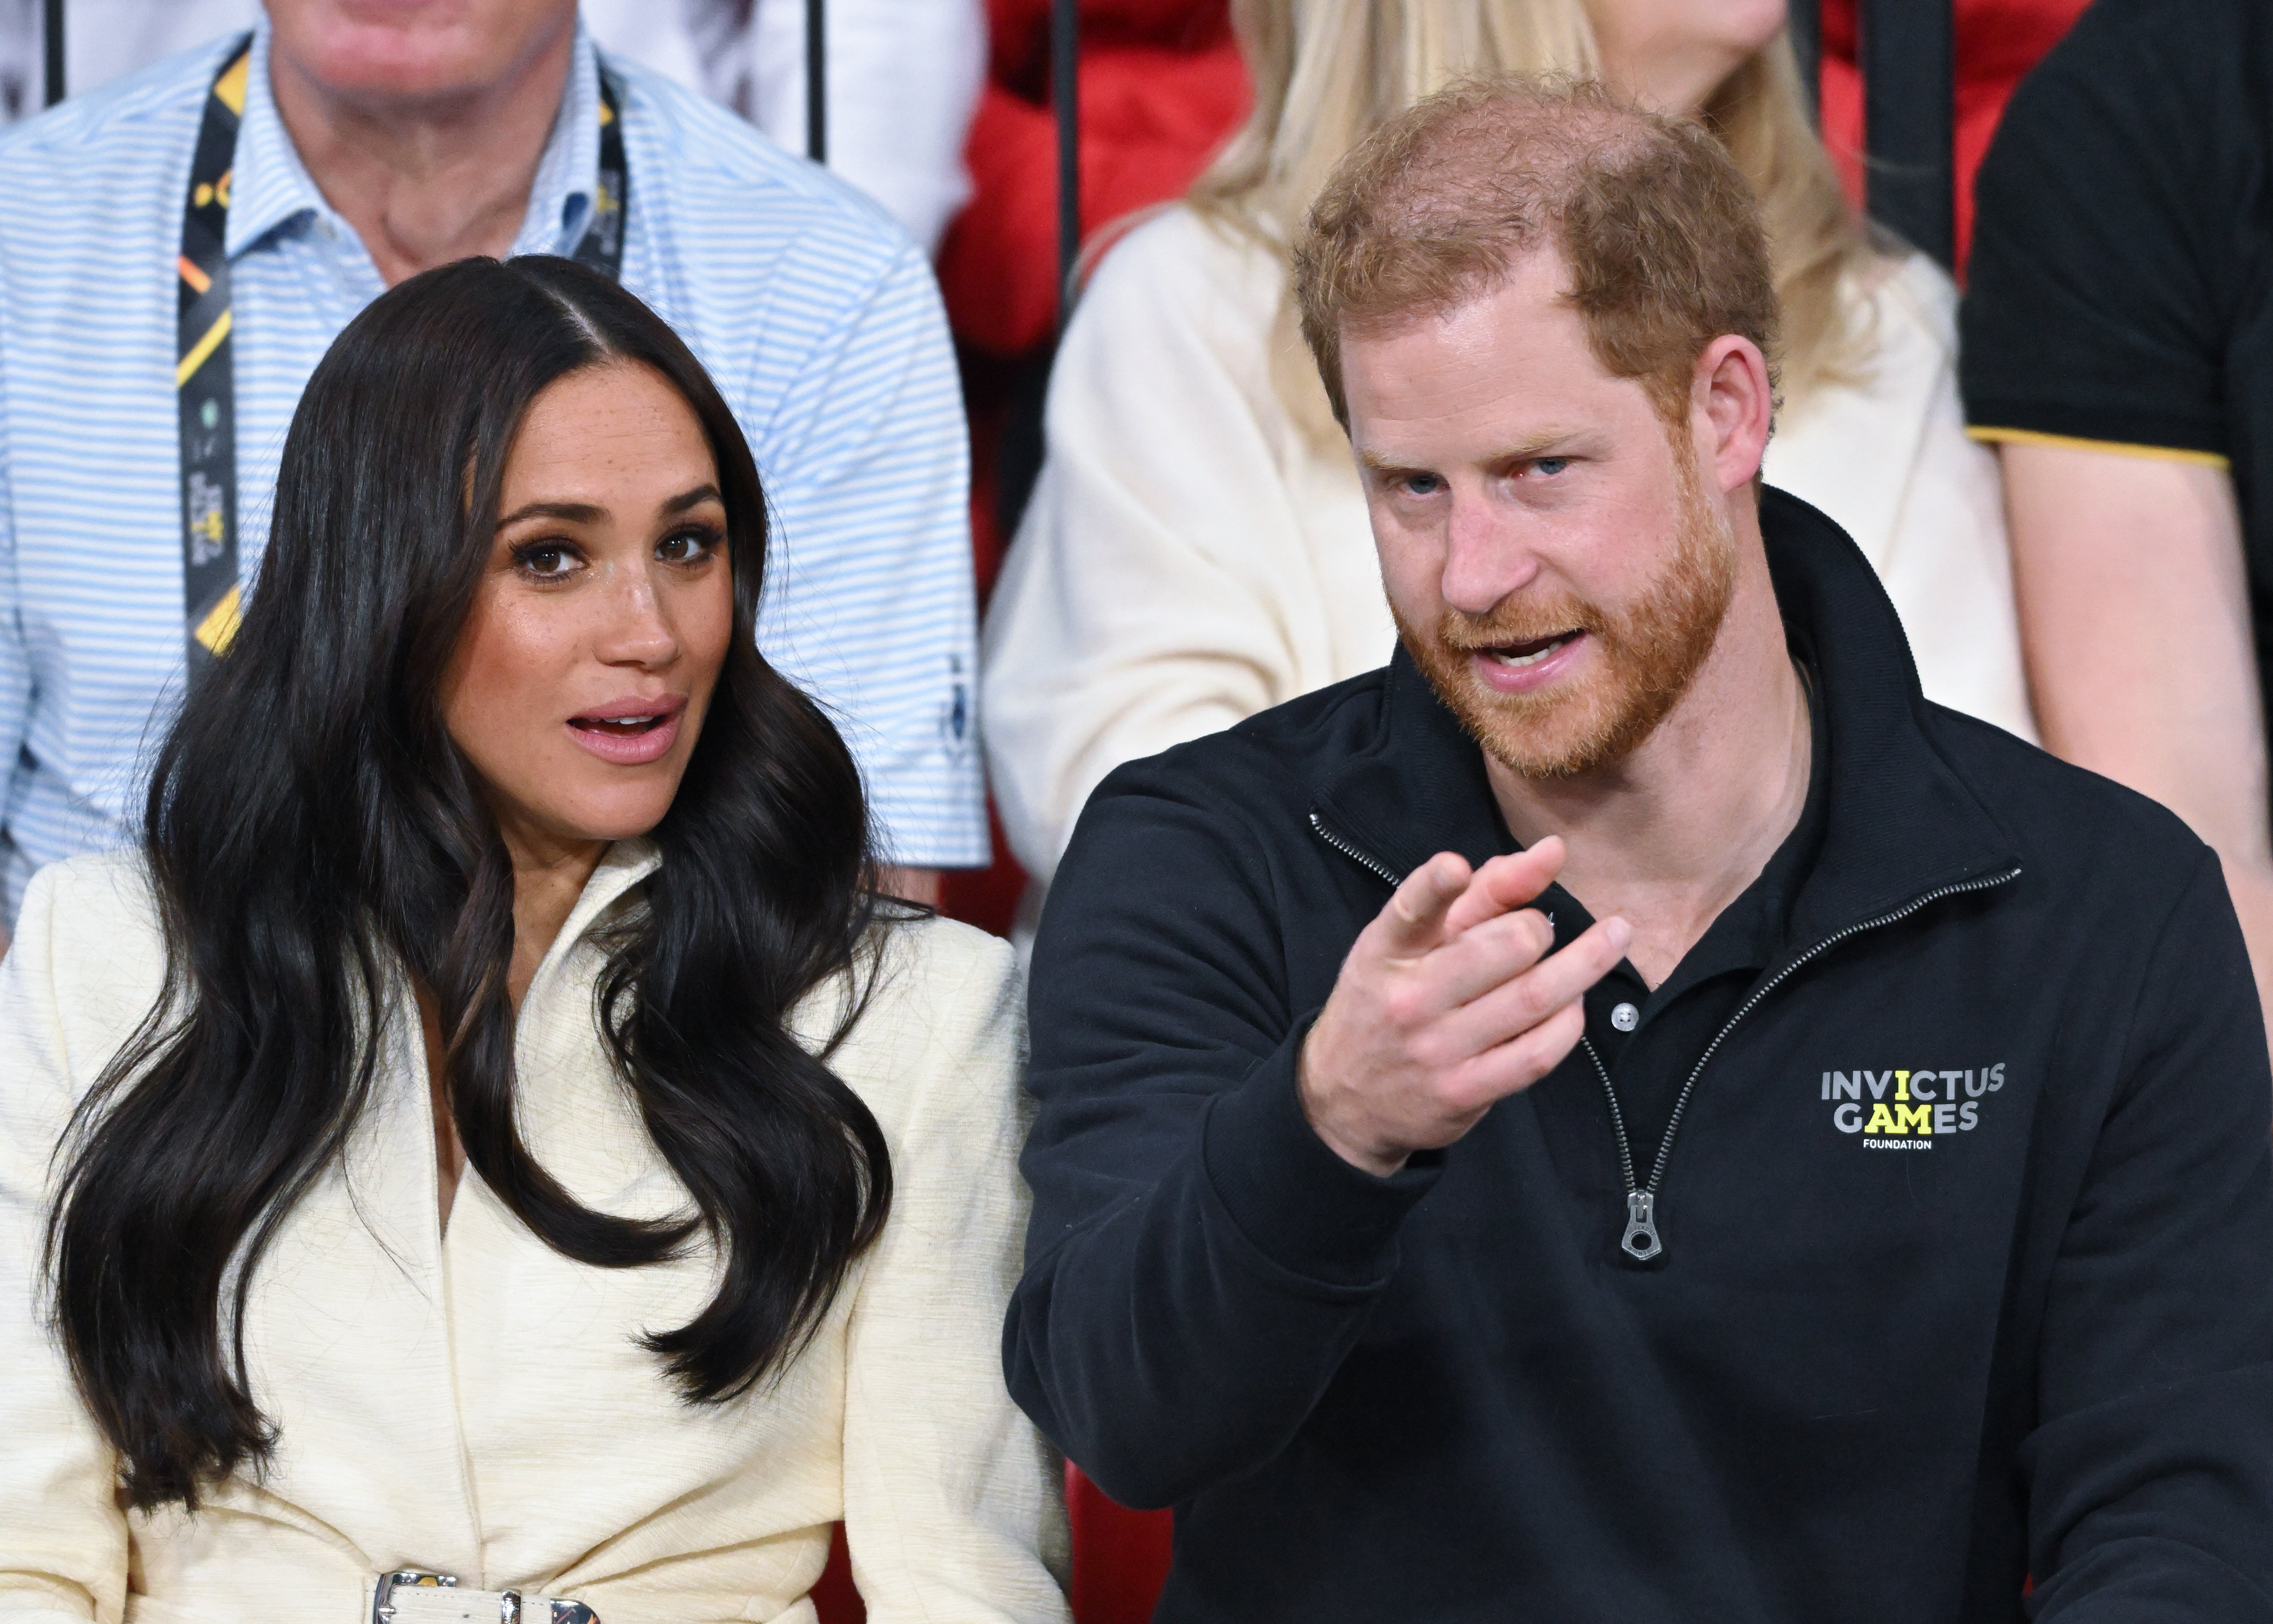 Prince Harry, Duke of Sussex and Meghan, Duchess of Sussex attend the sitting volleyball event during the Invictus Games at Zuiderpark on April 17, 2022 in The Hague, Netherlands. | Source: Getty Images